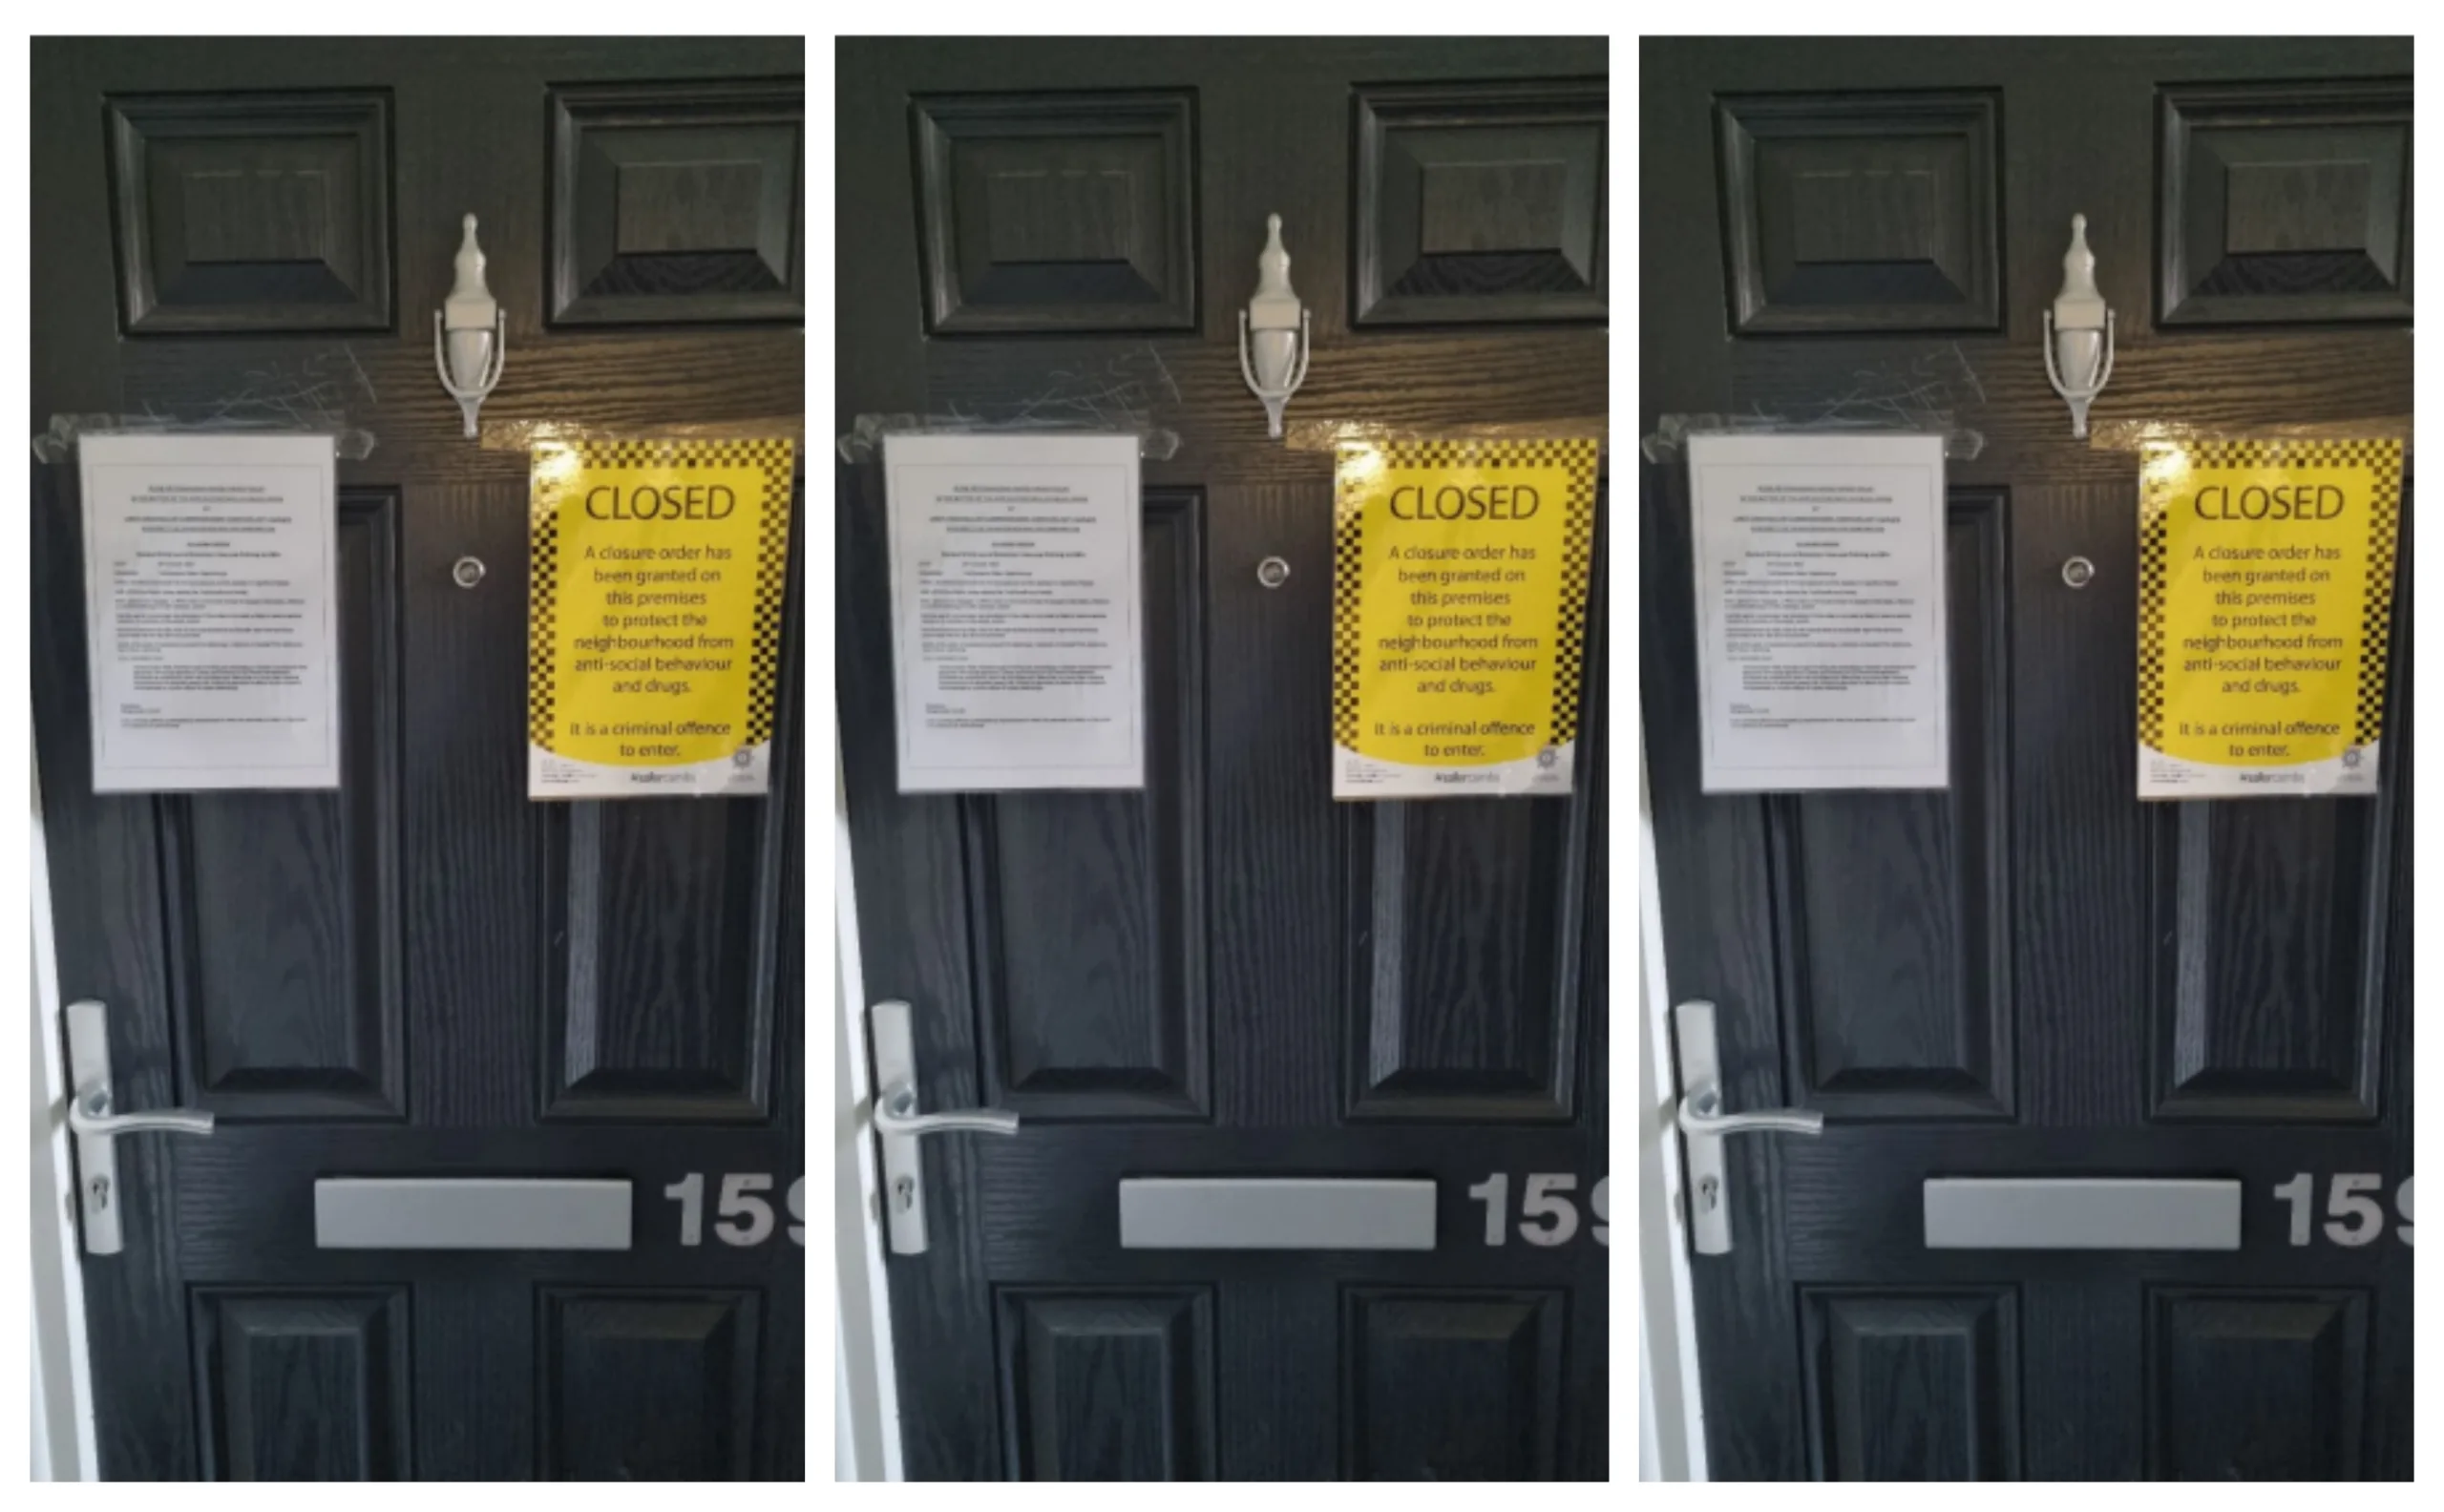 Closure order on 159 Kesteven Walk, Eastgate, following a successful application at Peterborough Magistrates’ Court.